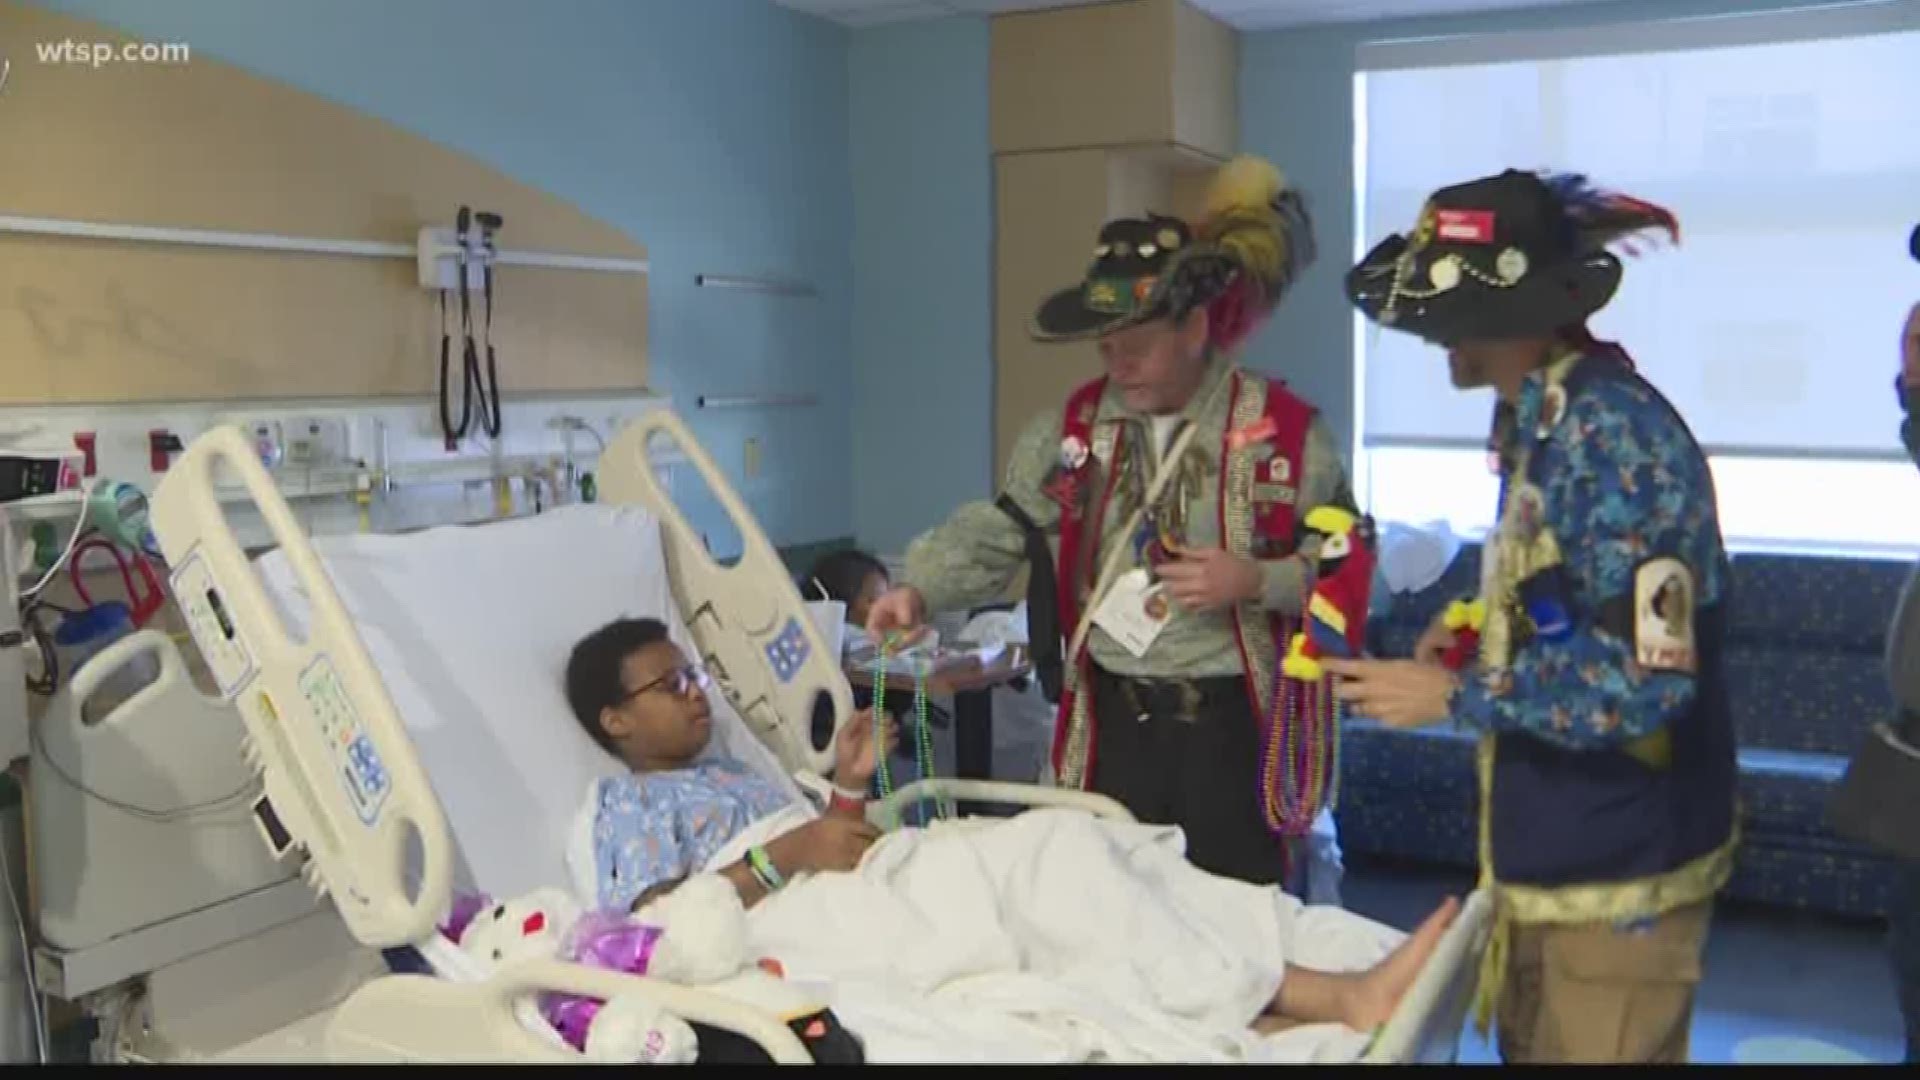 The pirates "invaded" Johns Hopkins All Children's Hospital to hand out toys for kids who couldn't make it to the Gasparilla Children's Parade.